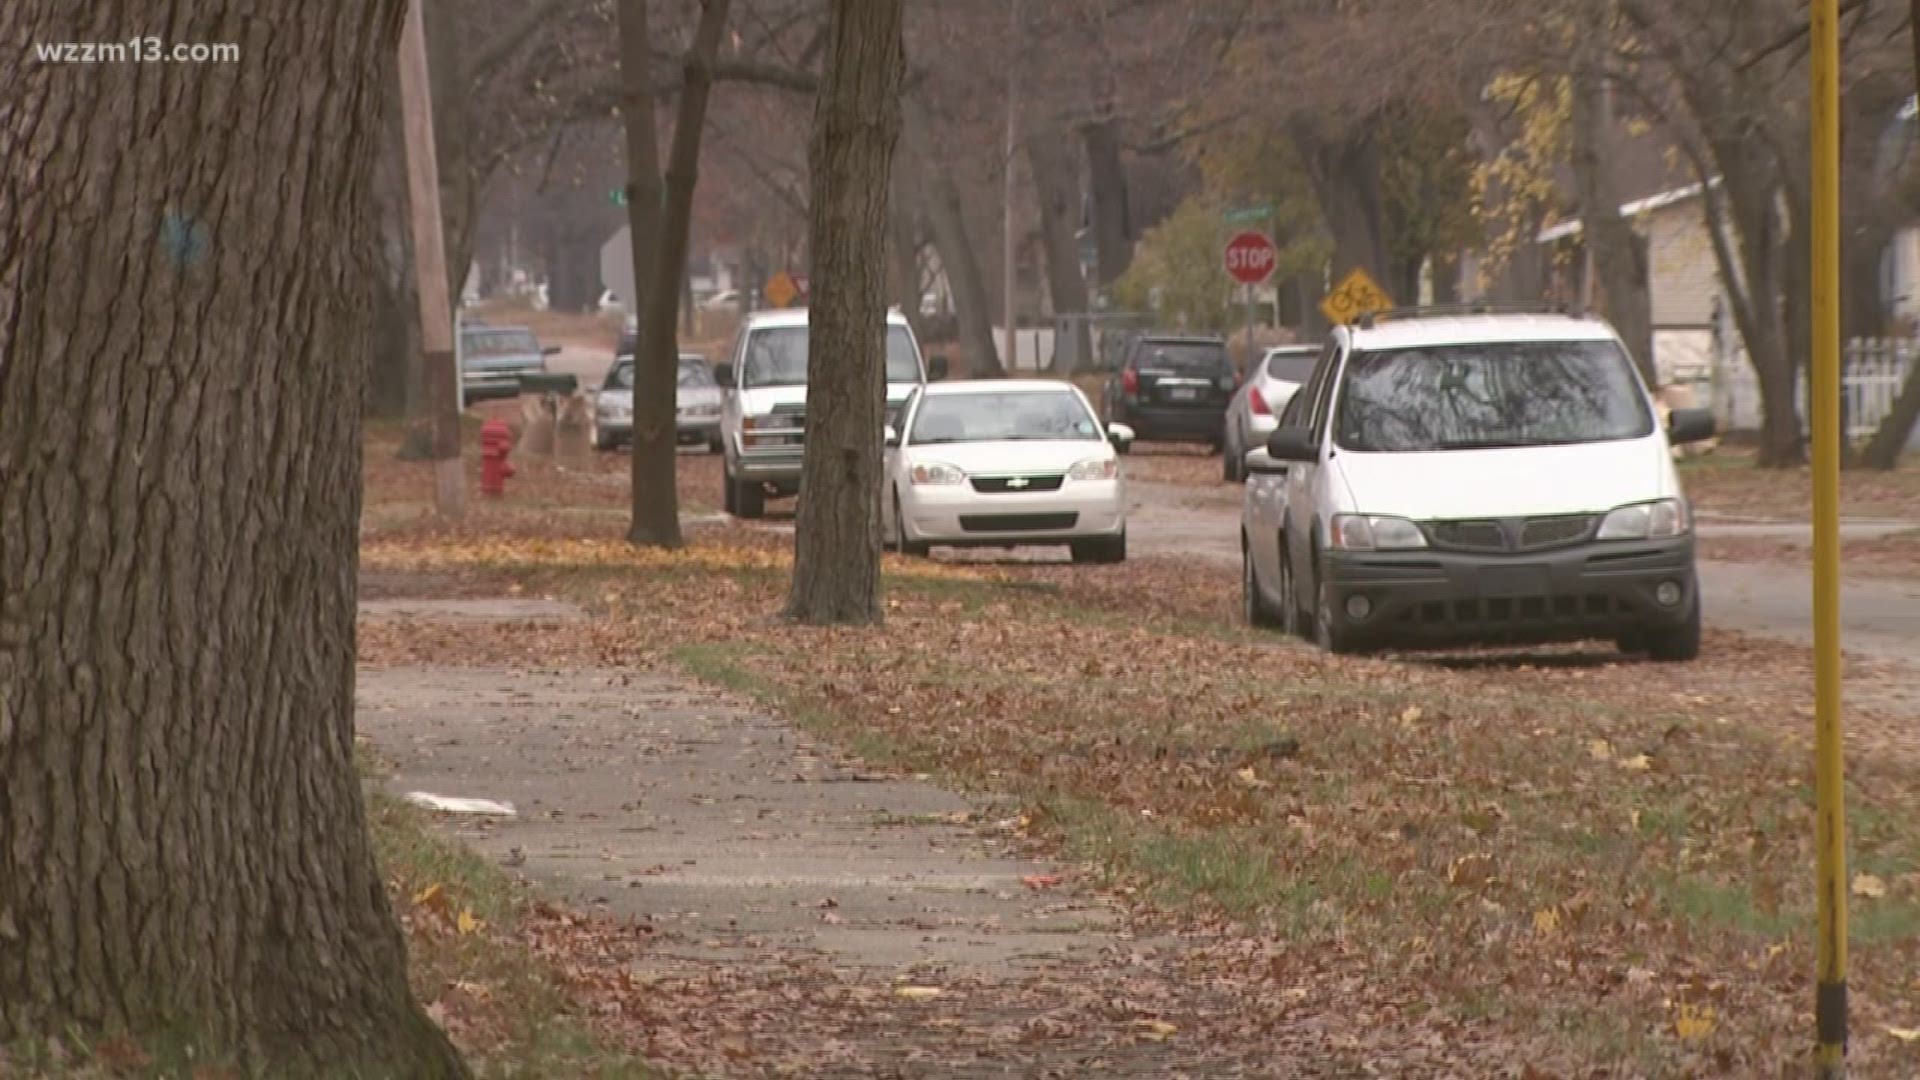 Muskegon may be taking on odd, evening parking